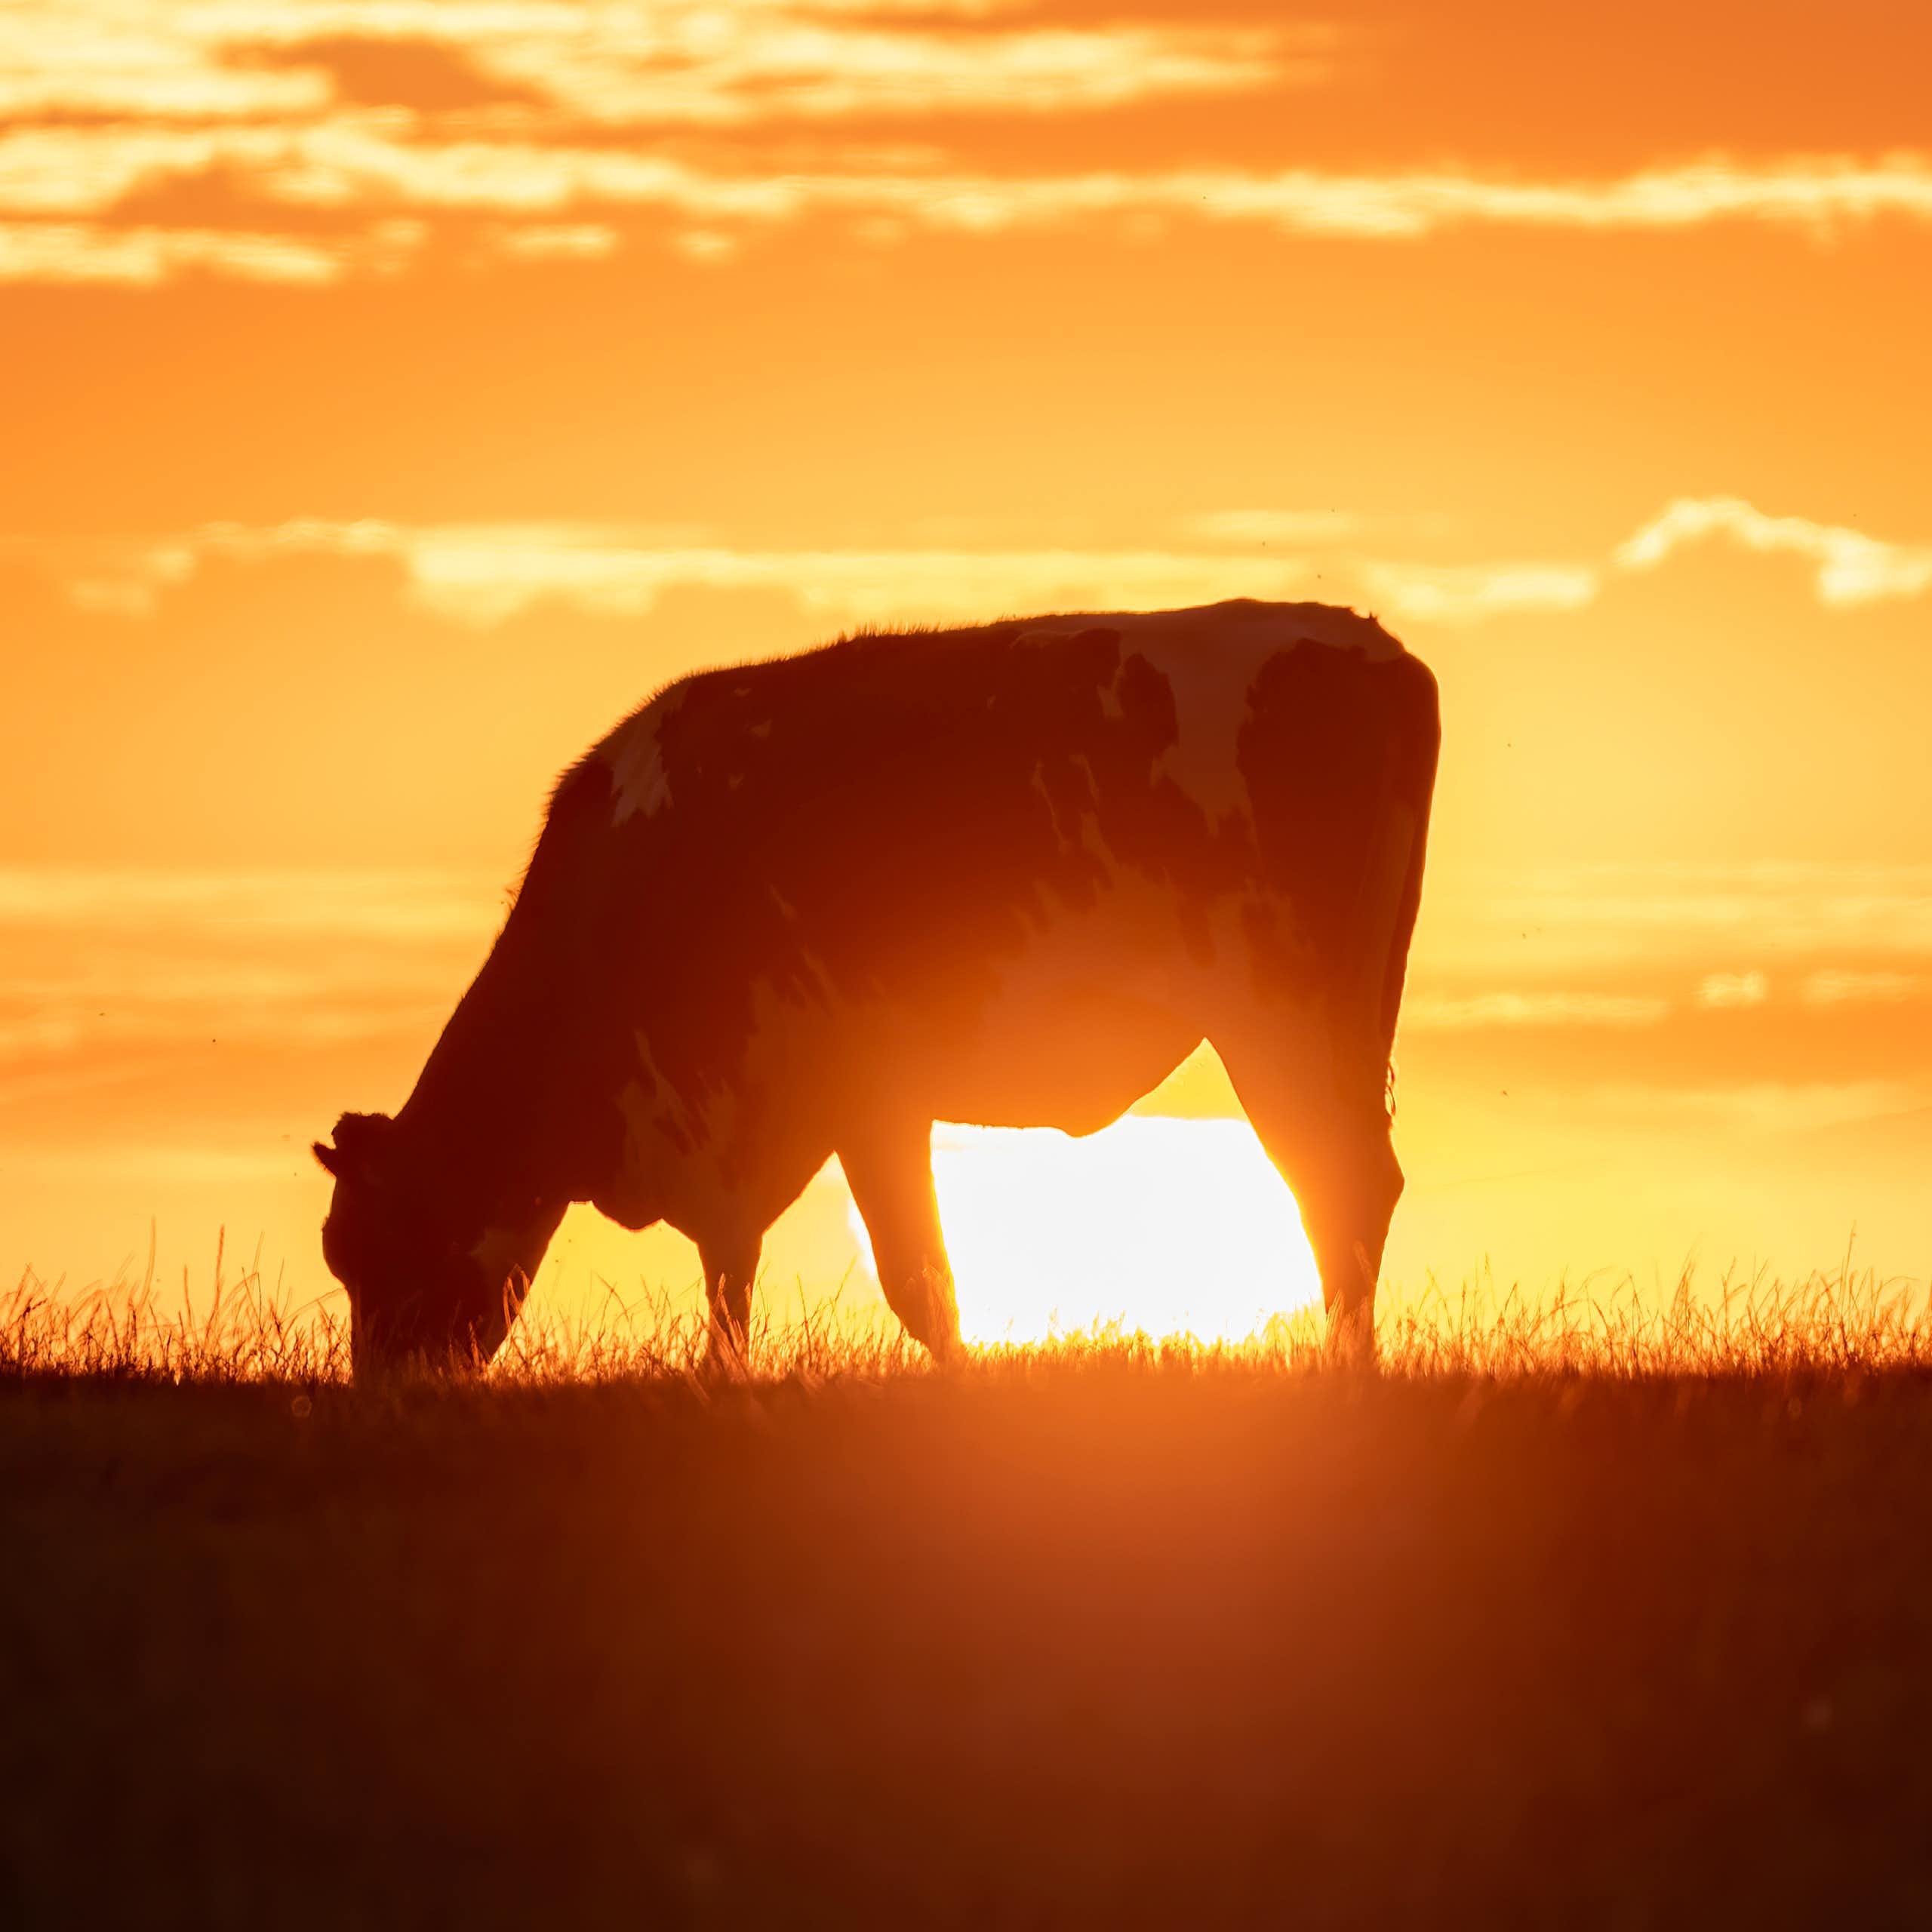 Cow at sunset